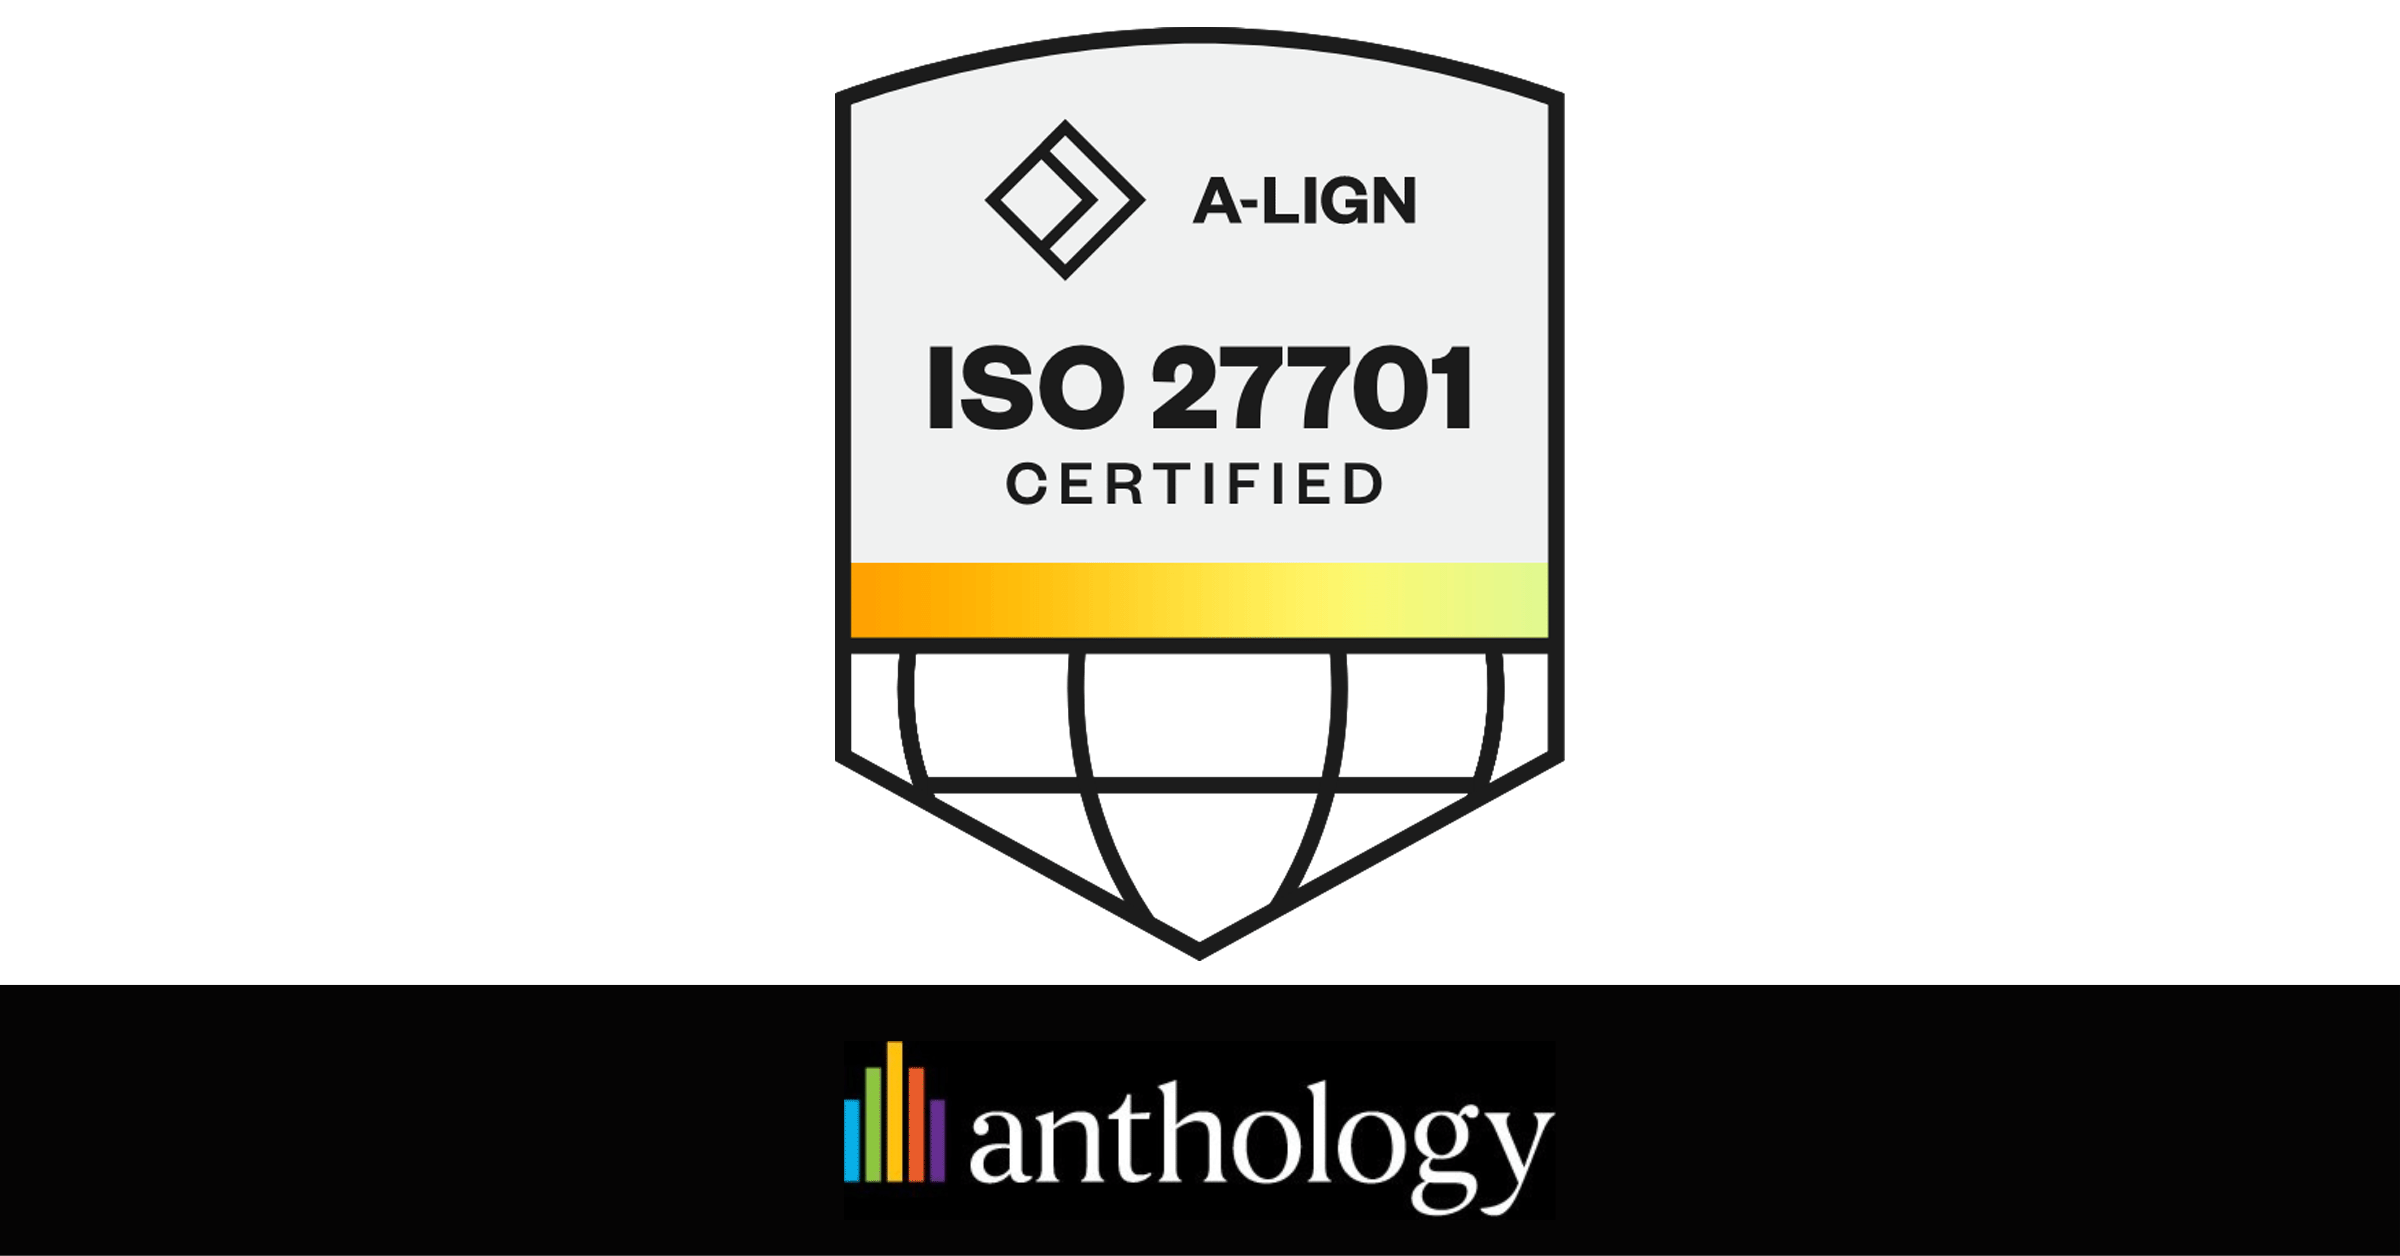 ISO 27701 Certified by A-LIGN badge locked up with the Anthology logo